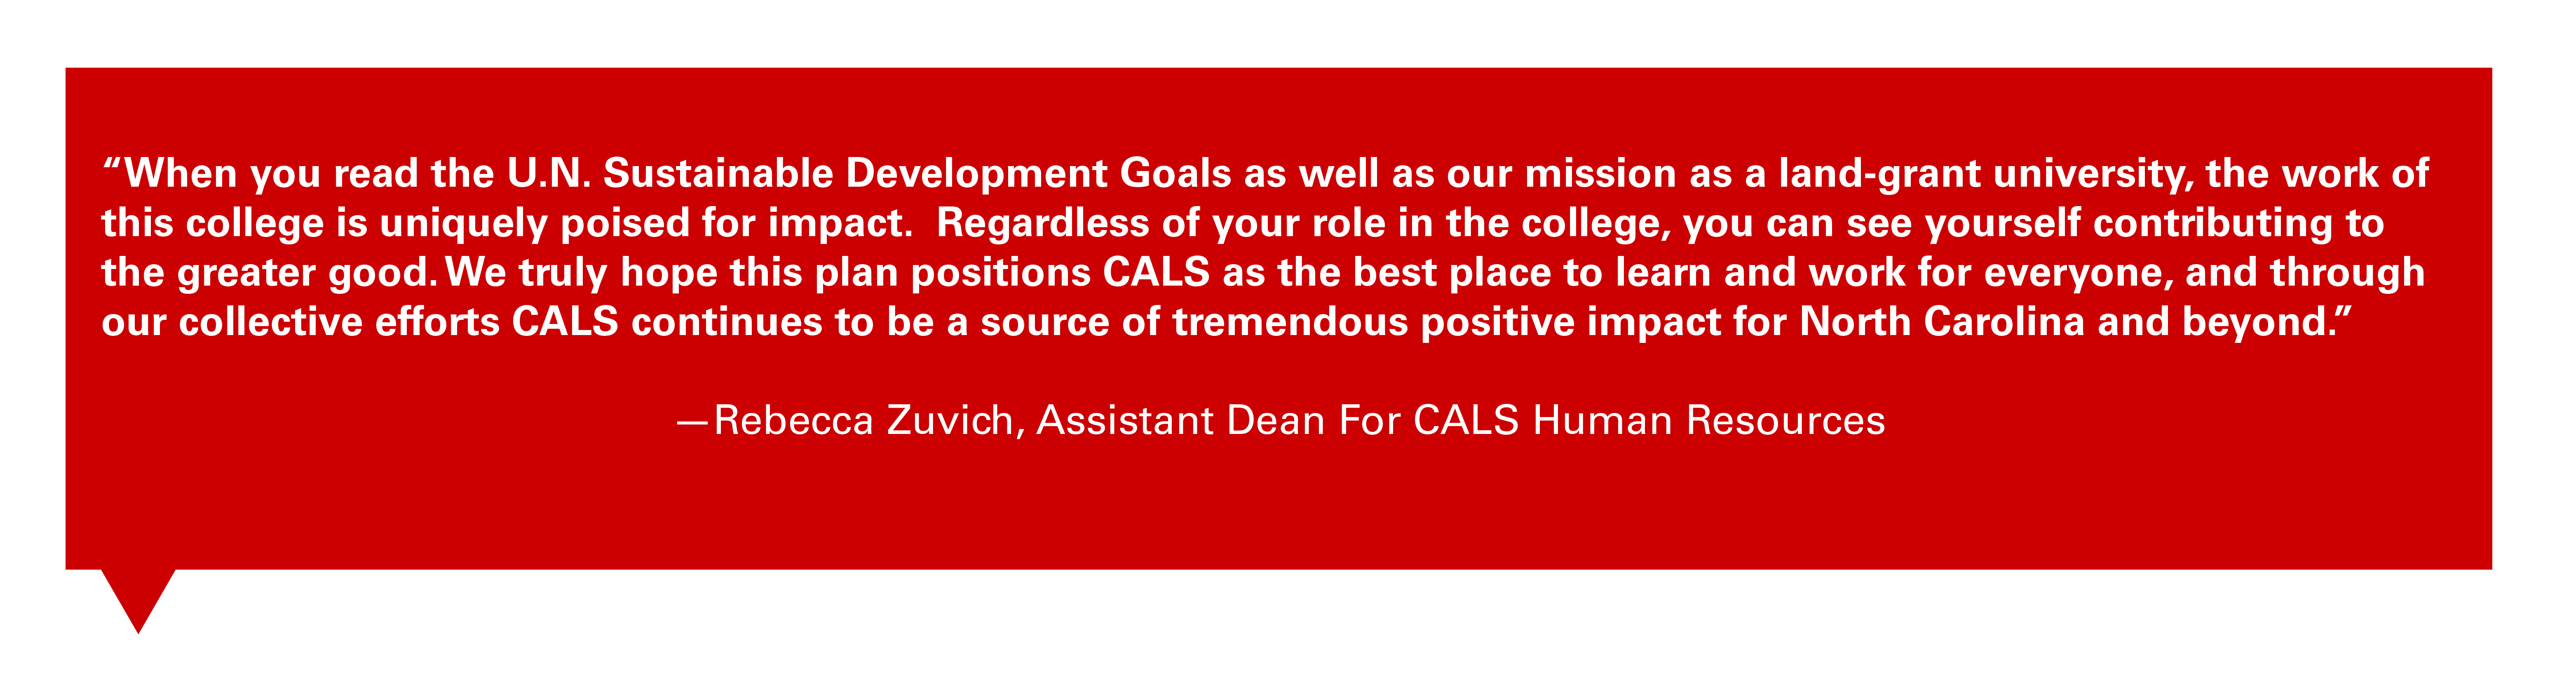 Quote from Rebecca Zuvich, CALS assistant dean for human resources: "When you read the U.N. Sustainable Development Goals as well as our mission as a land-grant university, the work of this college is uniquely poised for impact.  Regardless of your role in the college, you can see yourself contributing to the greater good. We truly hope this plan positions CALS as the best place to learn and work for everyone, and through our collective efforts CALS continues to be a source of tremendous positive impact for North Carolina and beyond."